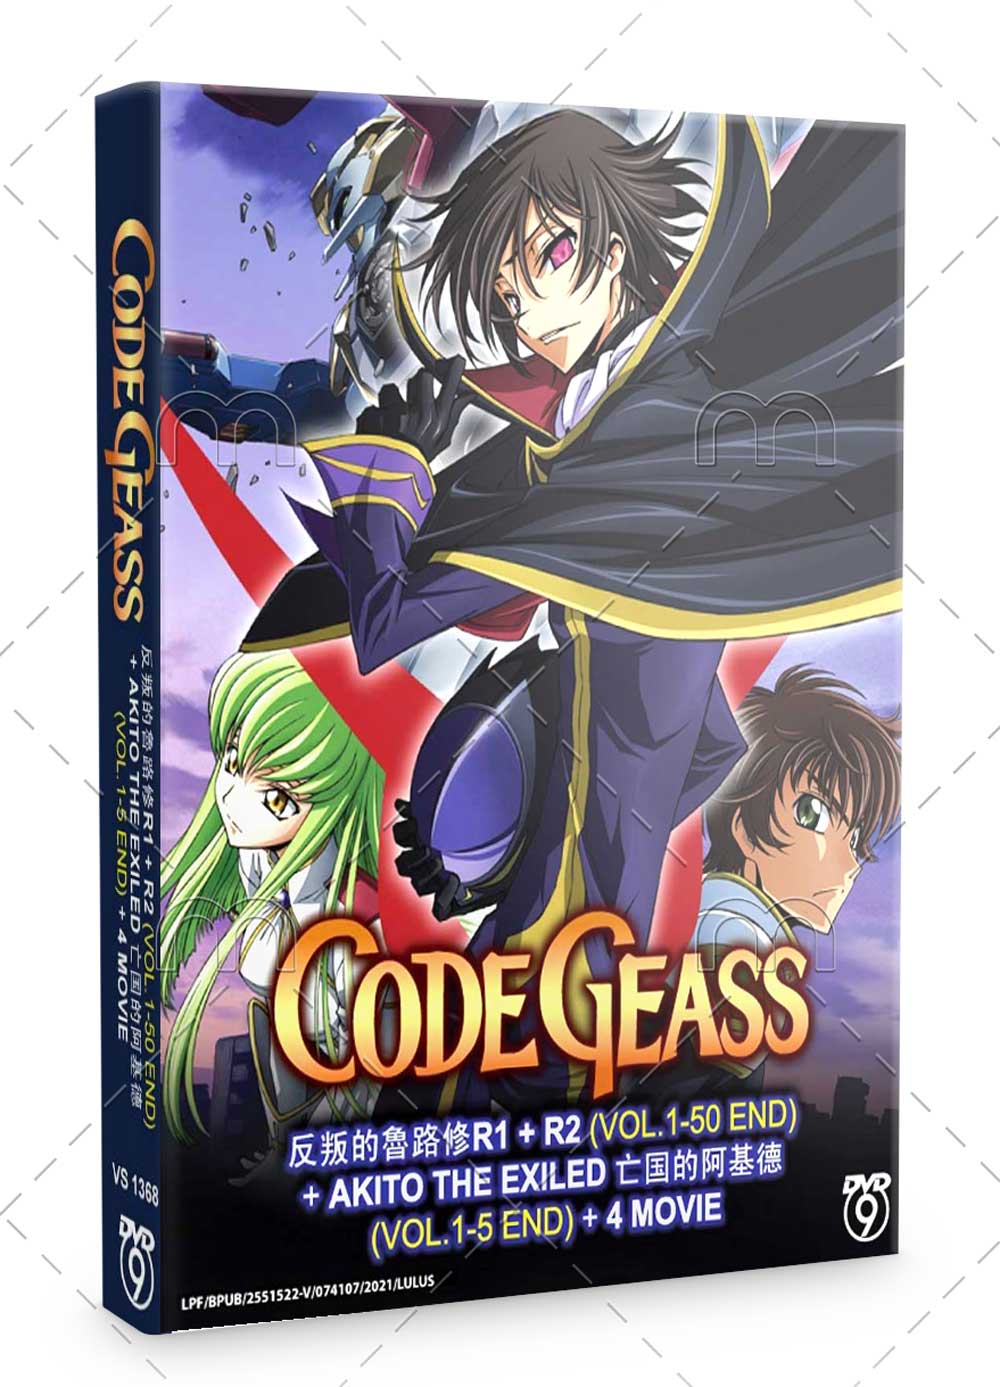 Code Geass R1+R2 Vol.1-50END+Akito The Exiled Vol.1-5END+4Movie (DVD) (2006-2012) アニメ